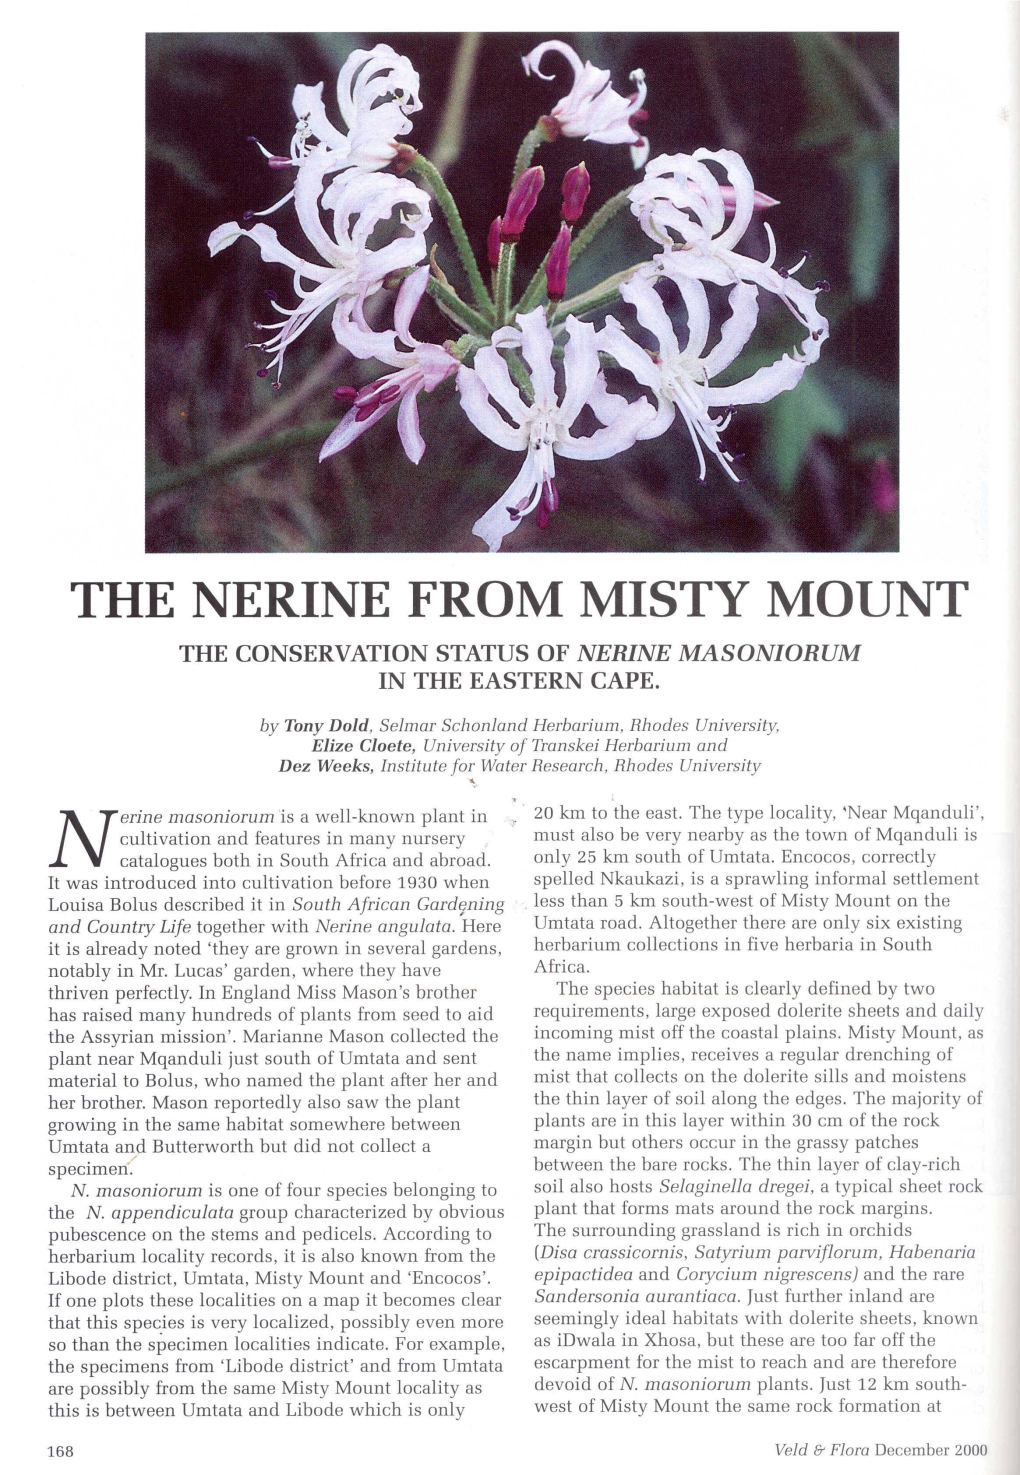 The Nerine from Misty Mount the Conservation Status of Nerine Masoniorum in the Eastern Cape